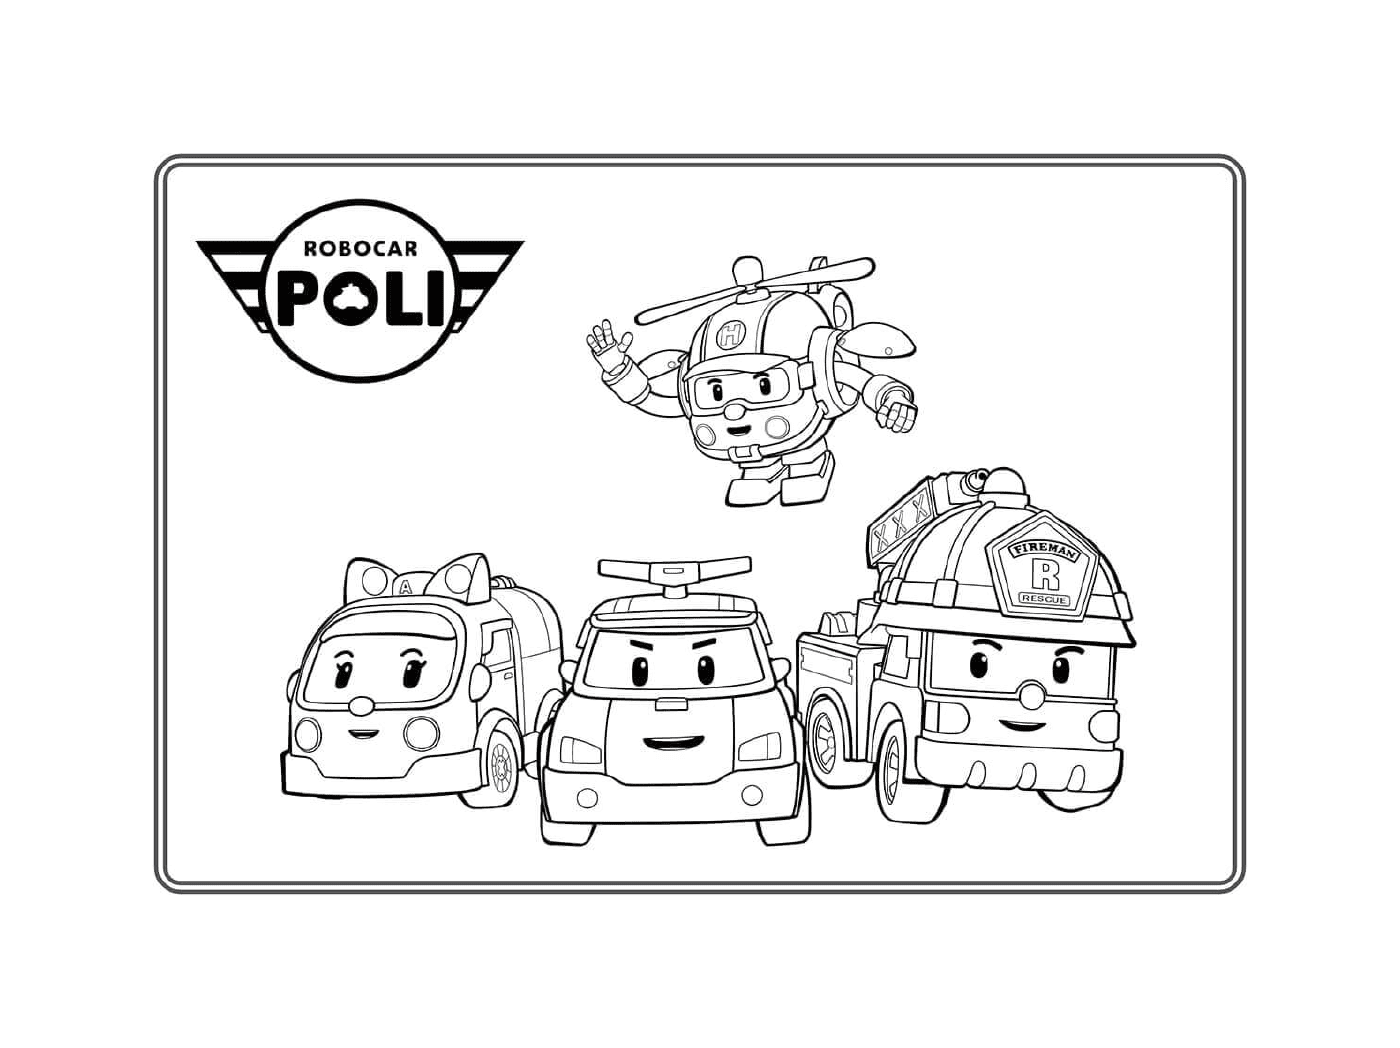  Ambulance, police, firefighter and Robocar Poli helicopter 